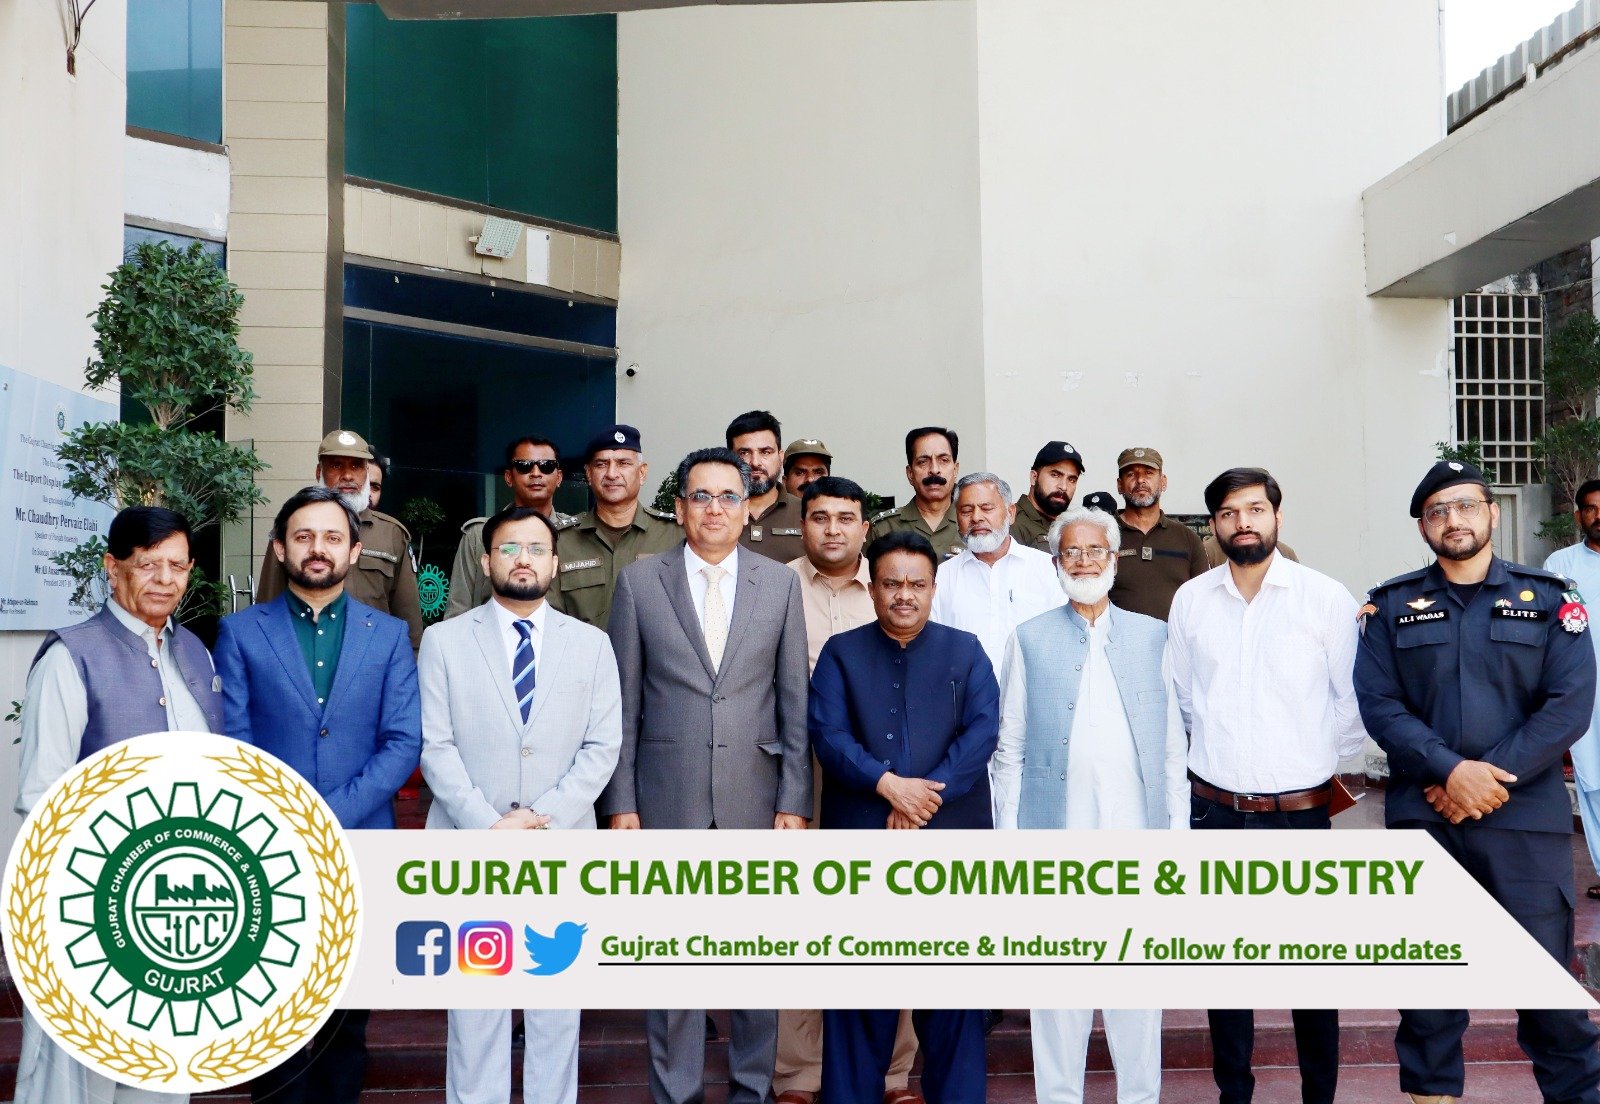 His Excellency MD Ruhul Alam Saddique, the #High_Commissioner of #Bangladesh to #Pakistan, paid a visit to the Gujrat Chamber of Commerce & Industry where he engaged in discussions with the local business community.